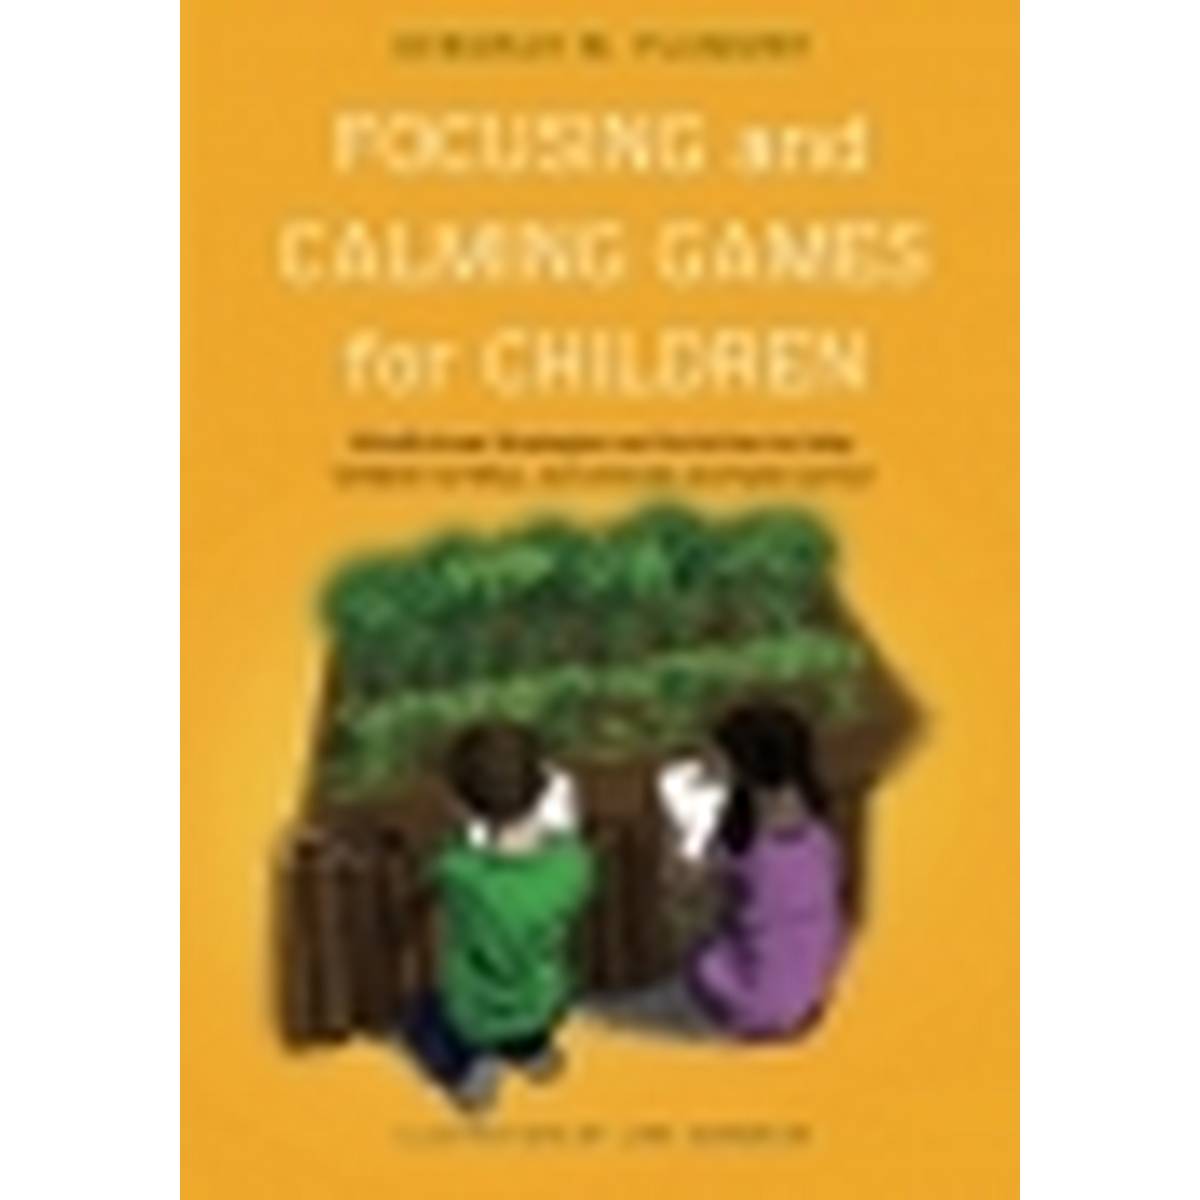 Focusing and Calming Games for Children